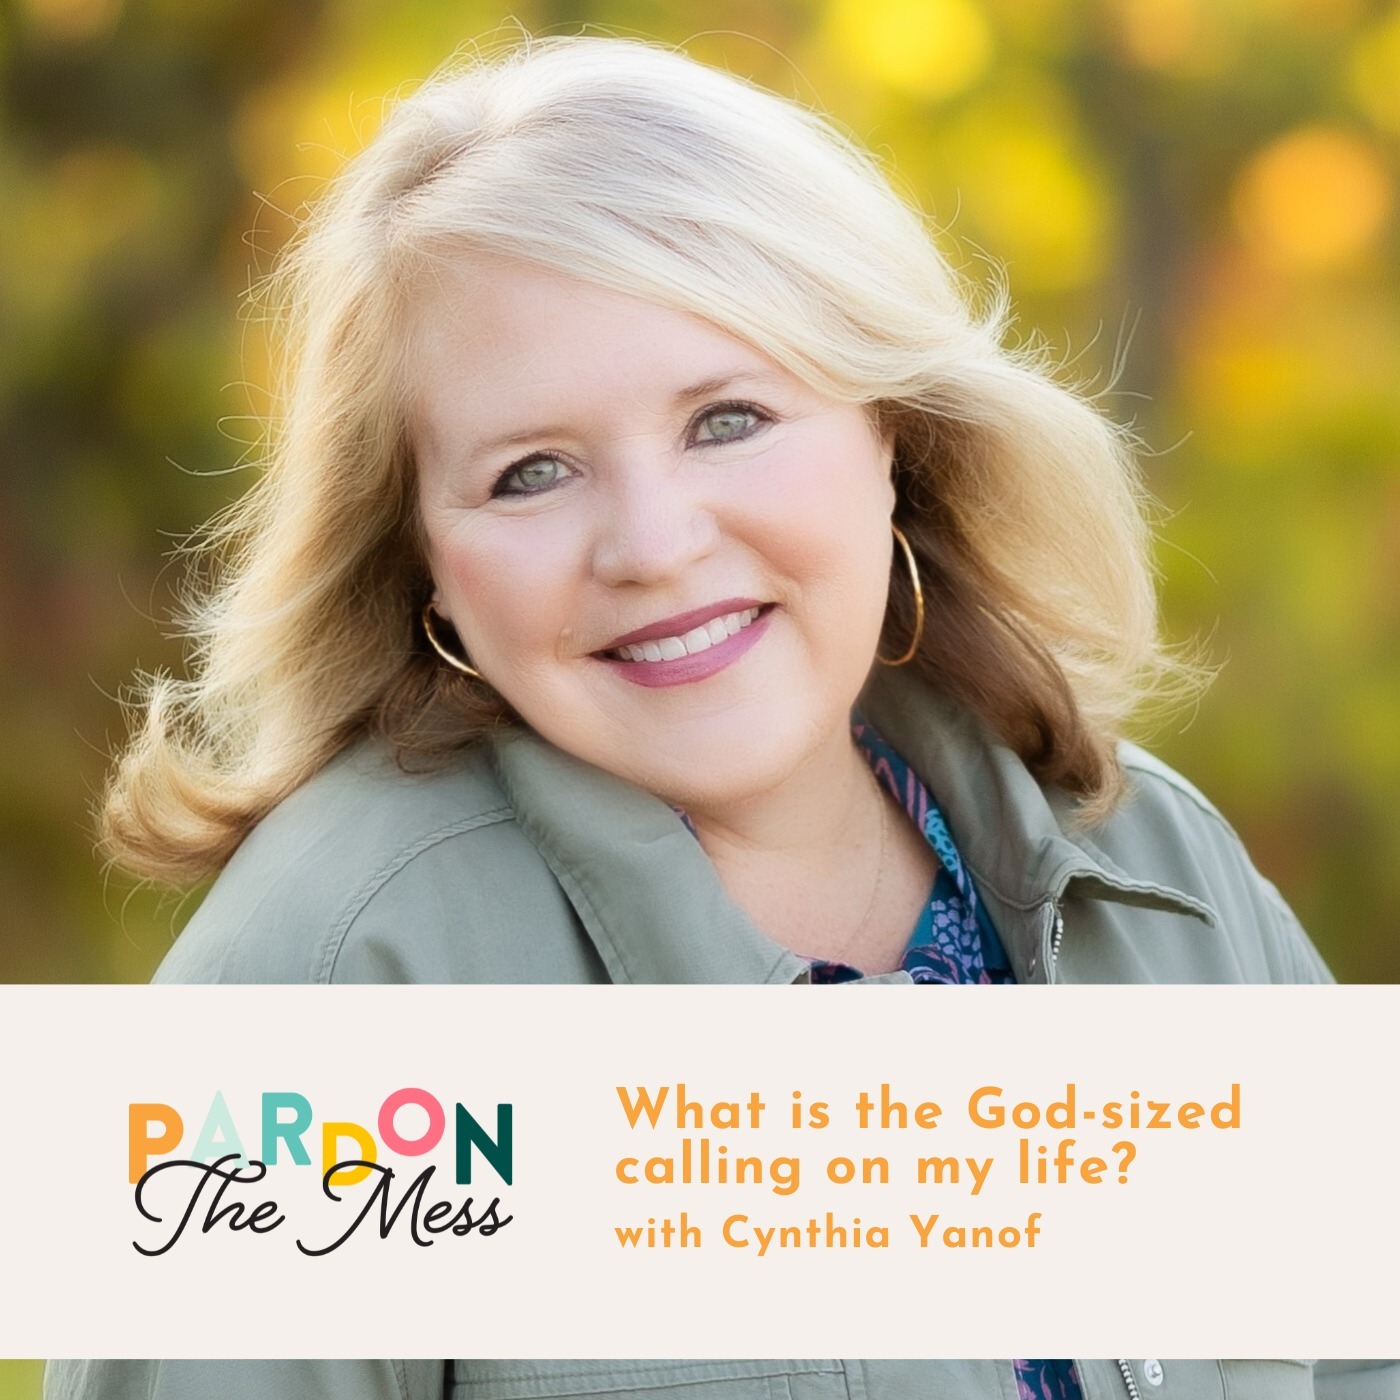 What is the God-sized calling on my life? With Cynthia Yanof